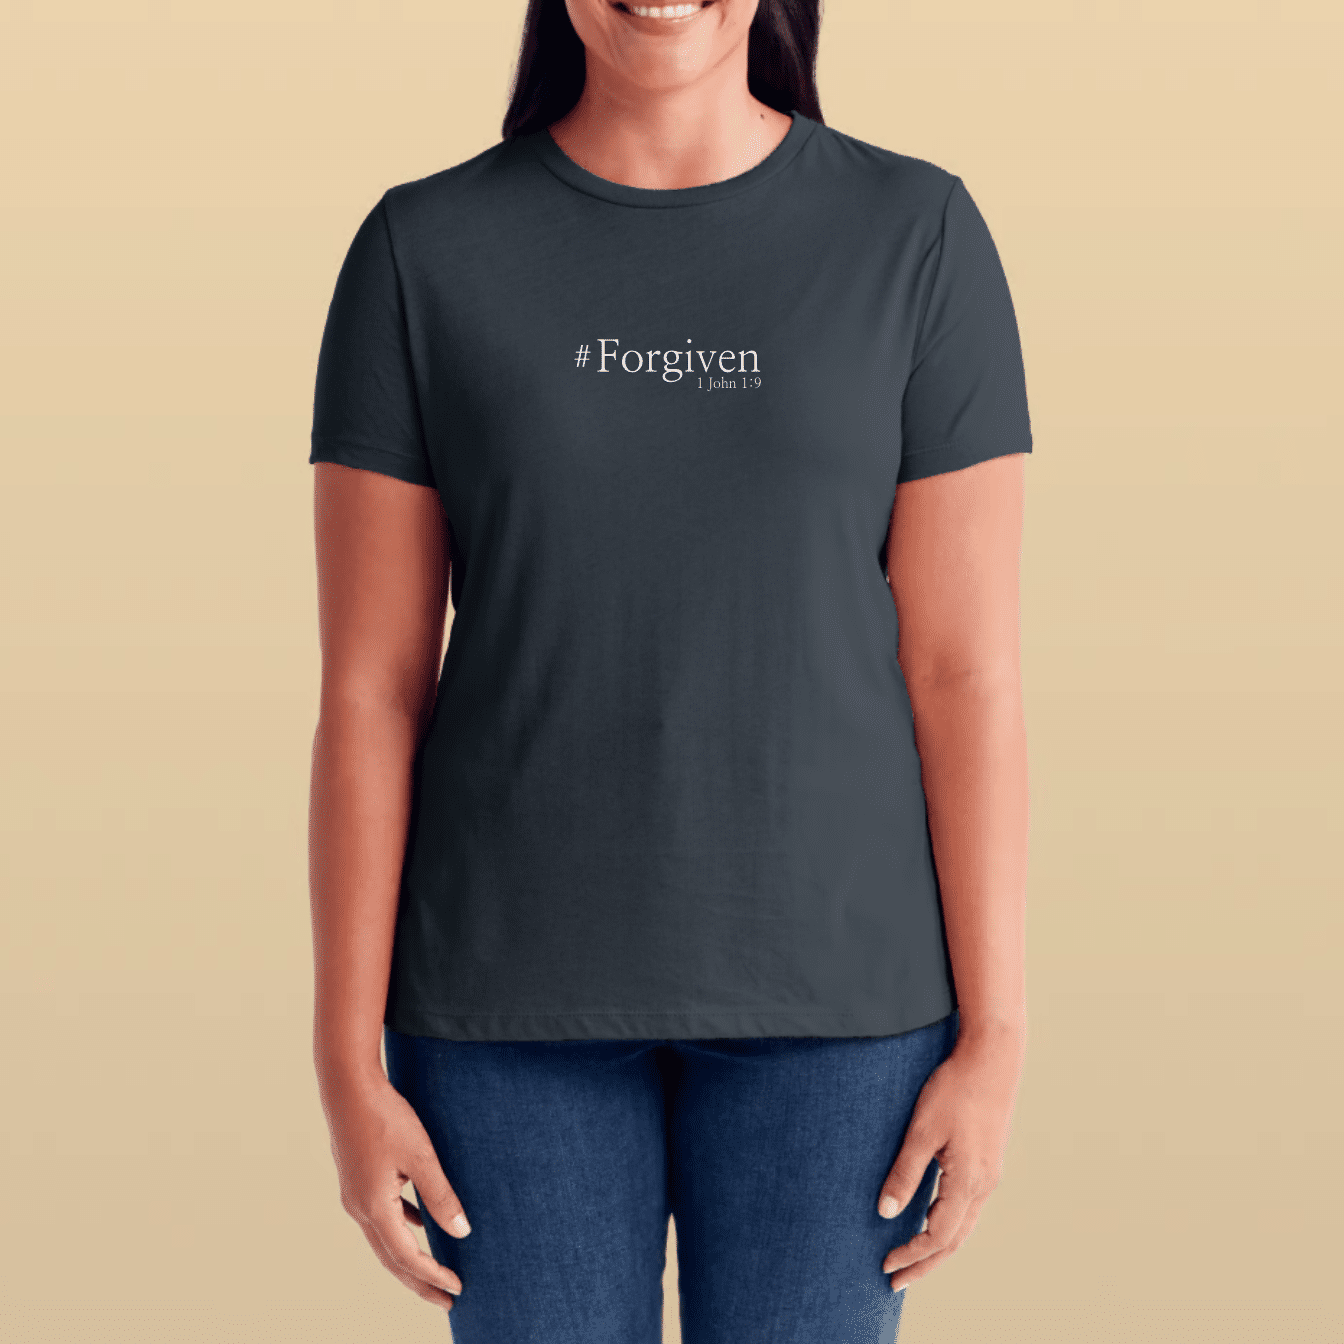 #forgiven shirt available at Little Big Things Christian Book Store